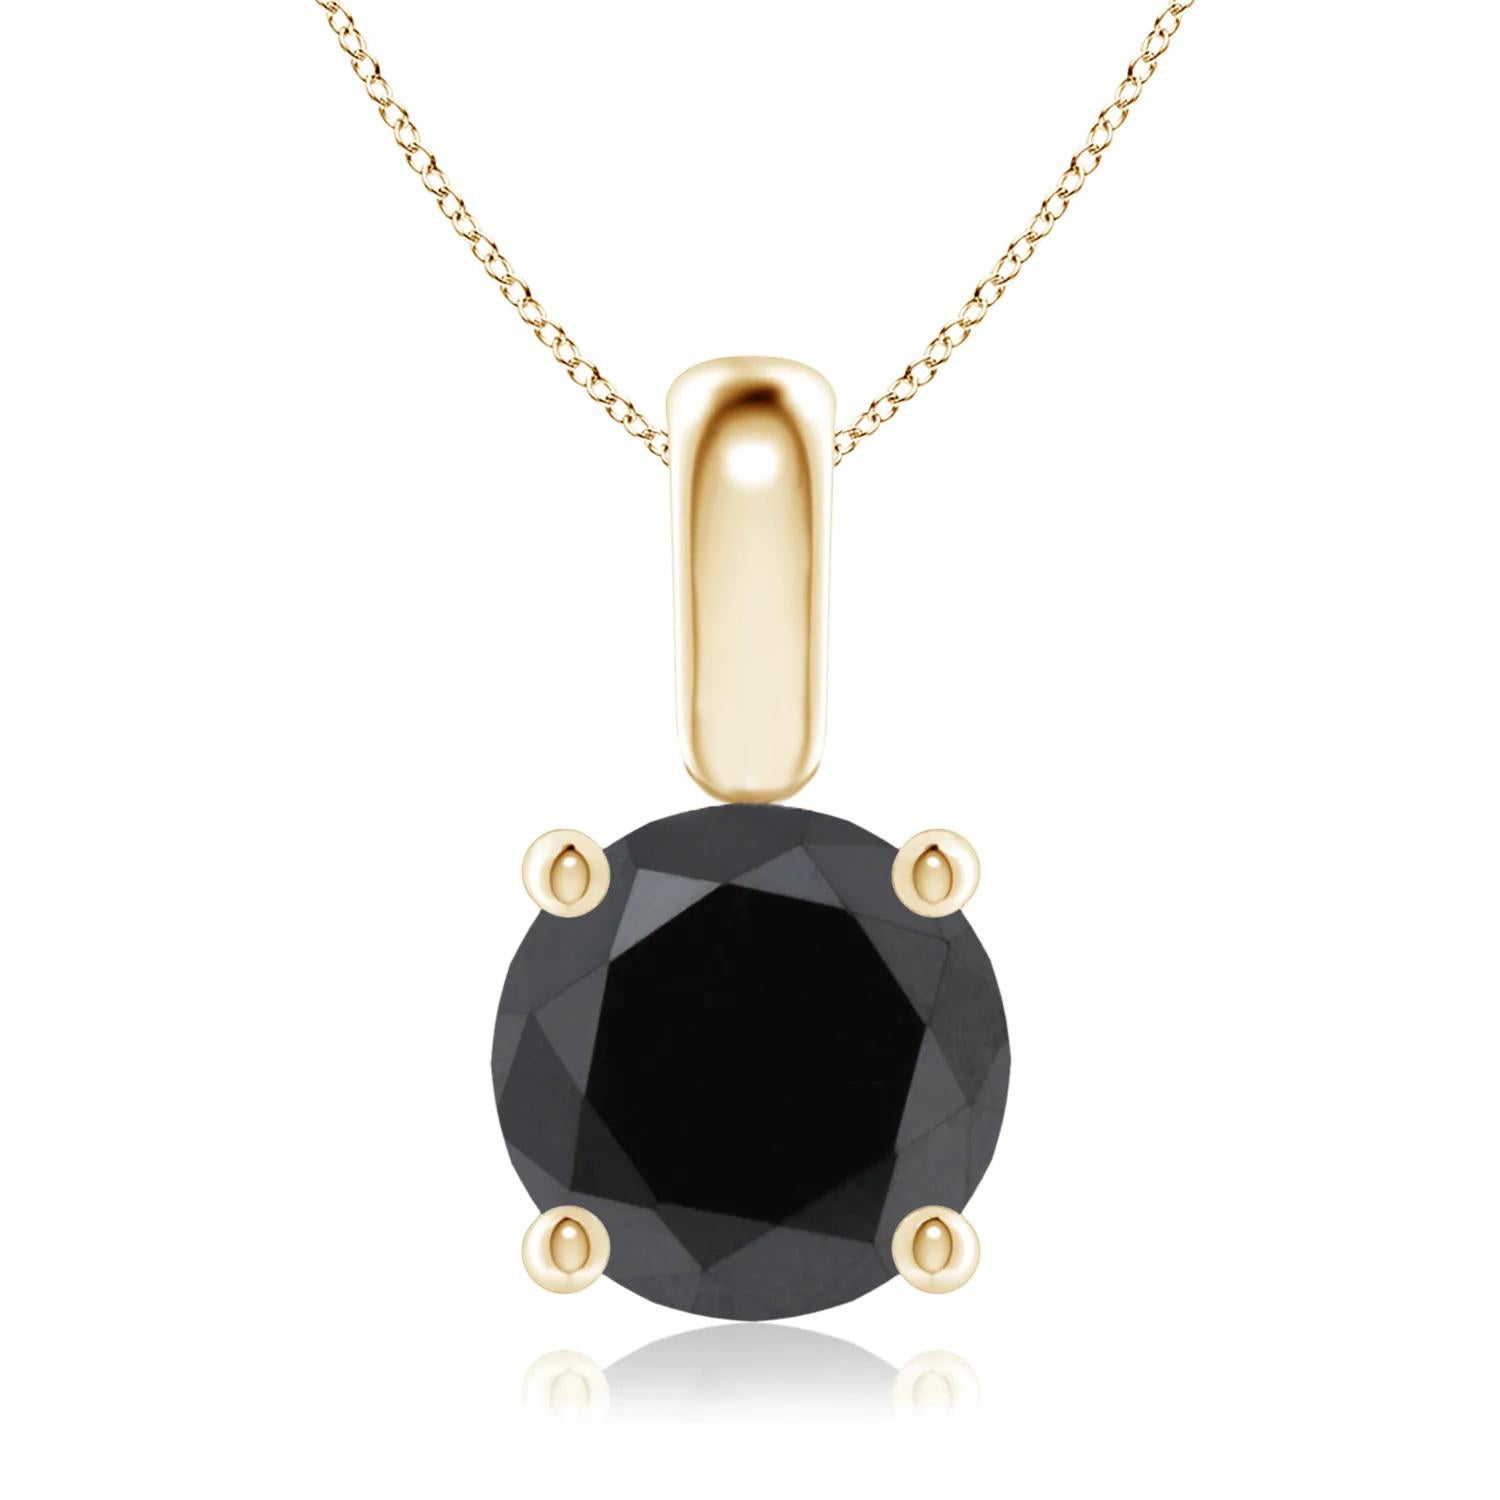 Contemporary 3.15 Carat Round Black Diamond Solitaire Pendant Necklace in 14K Yellow Gold